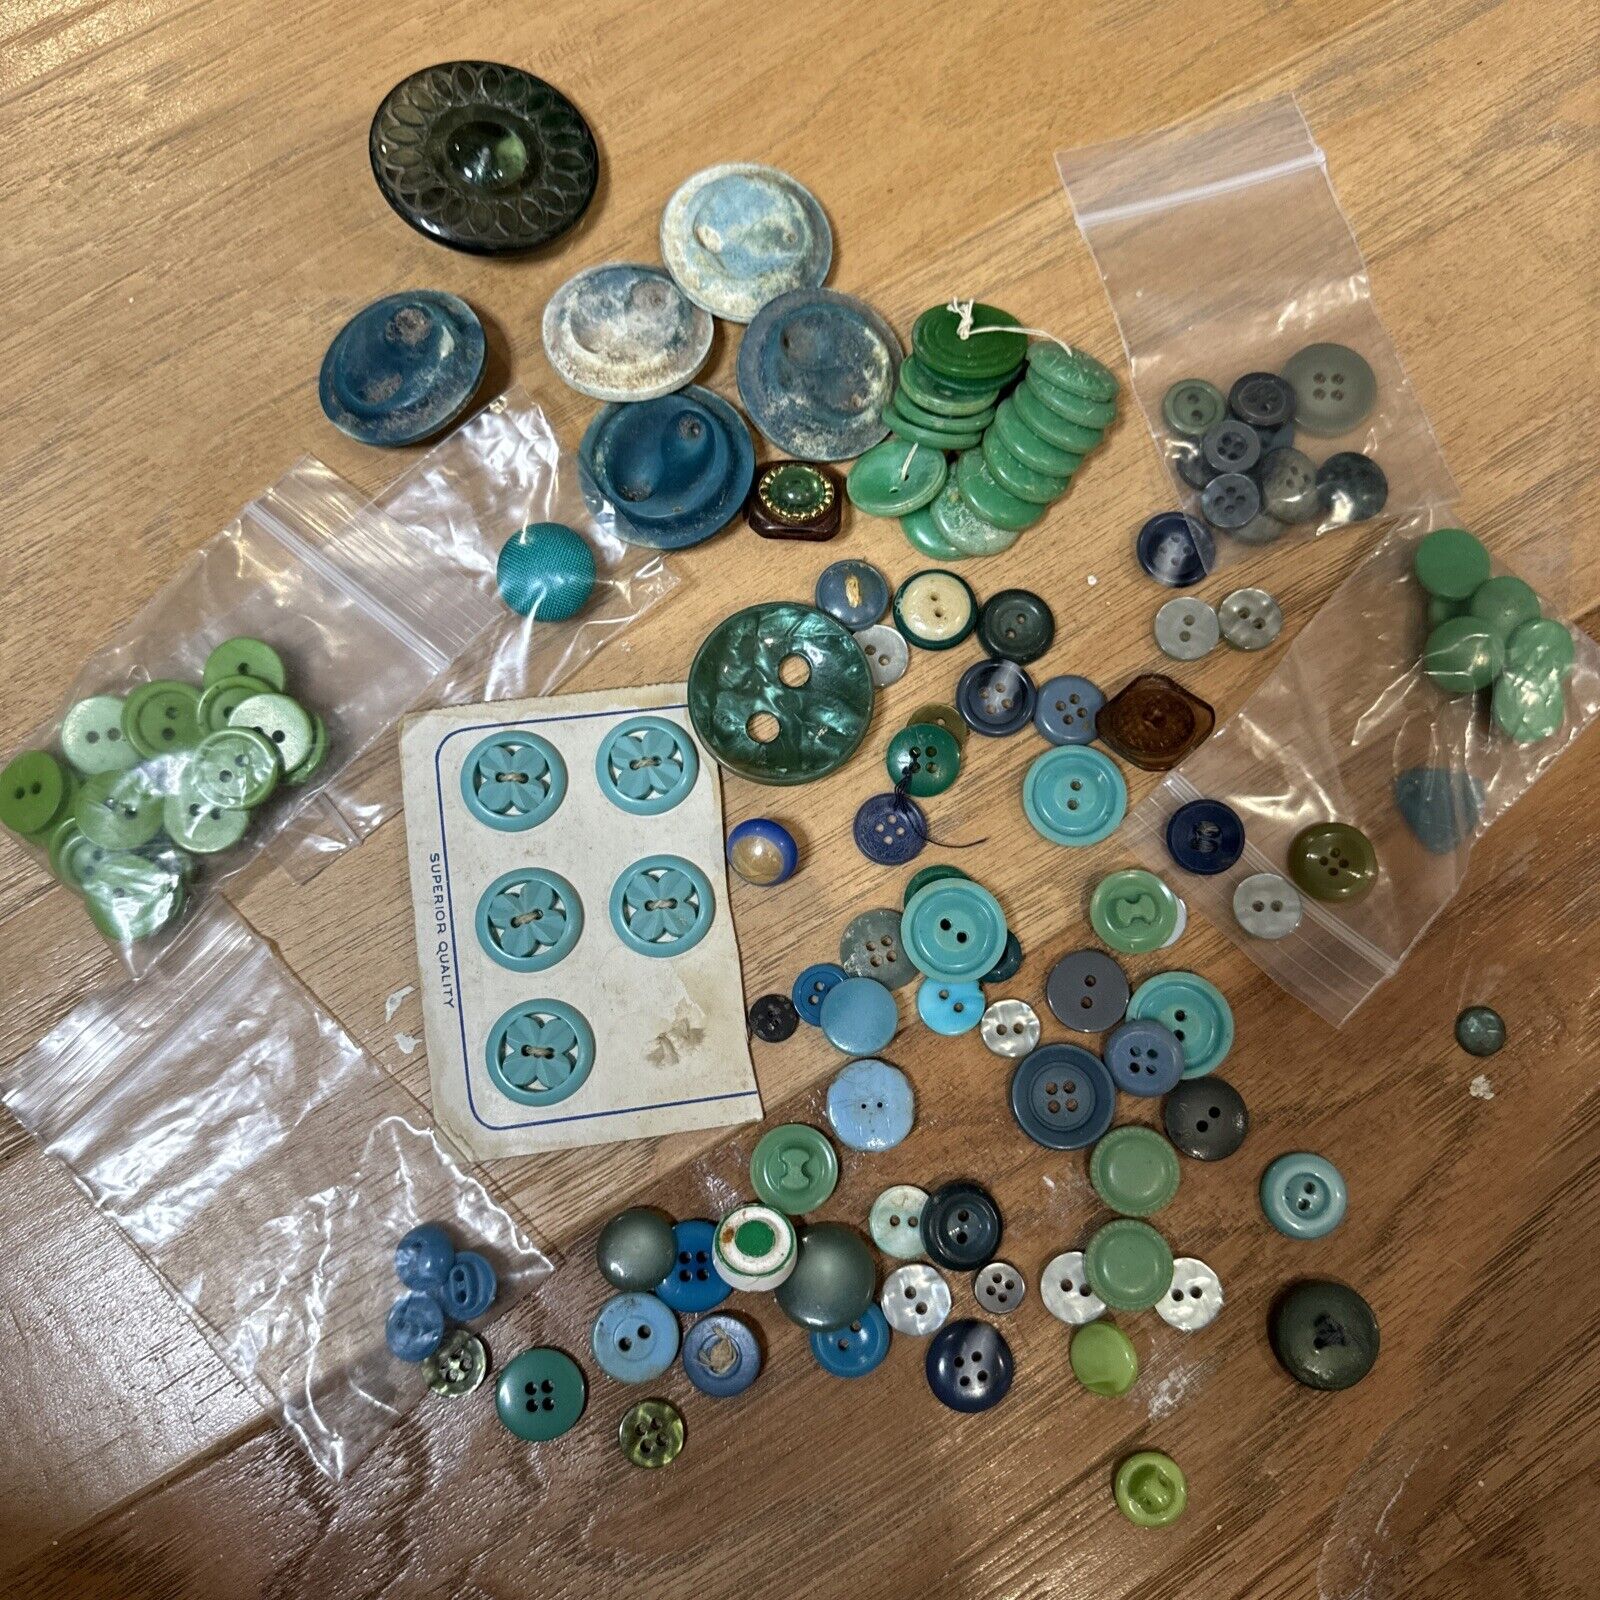 Huge Lot Antique Vintage Buttons ~ All Types Large And Small Aqua , Blue Green